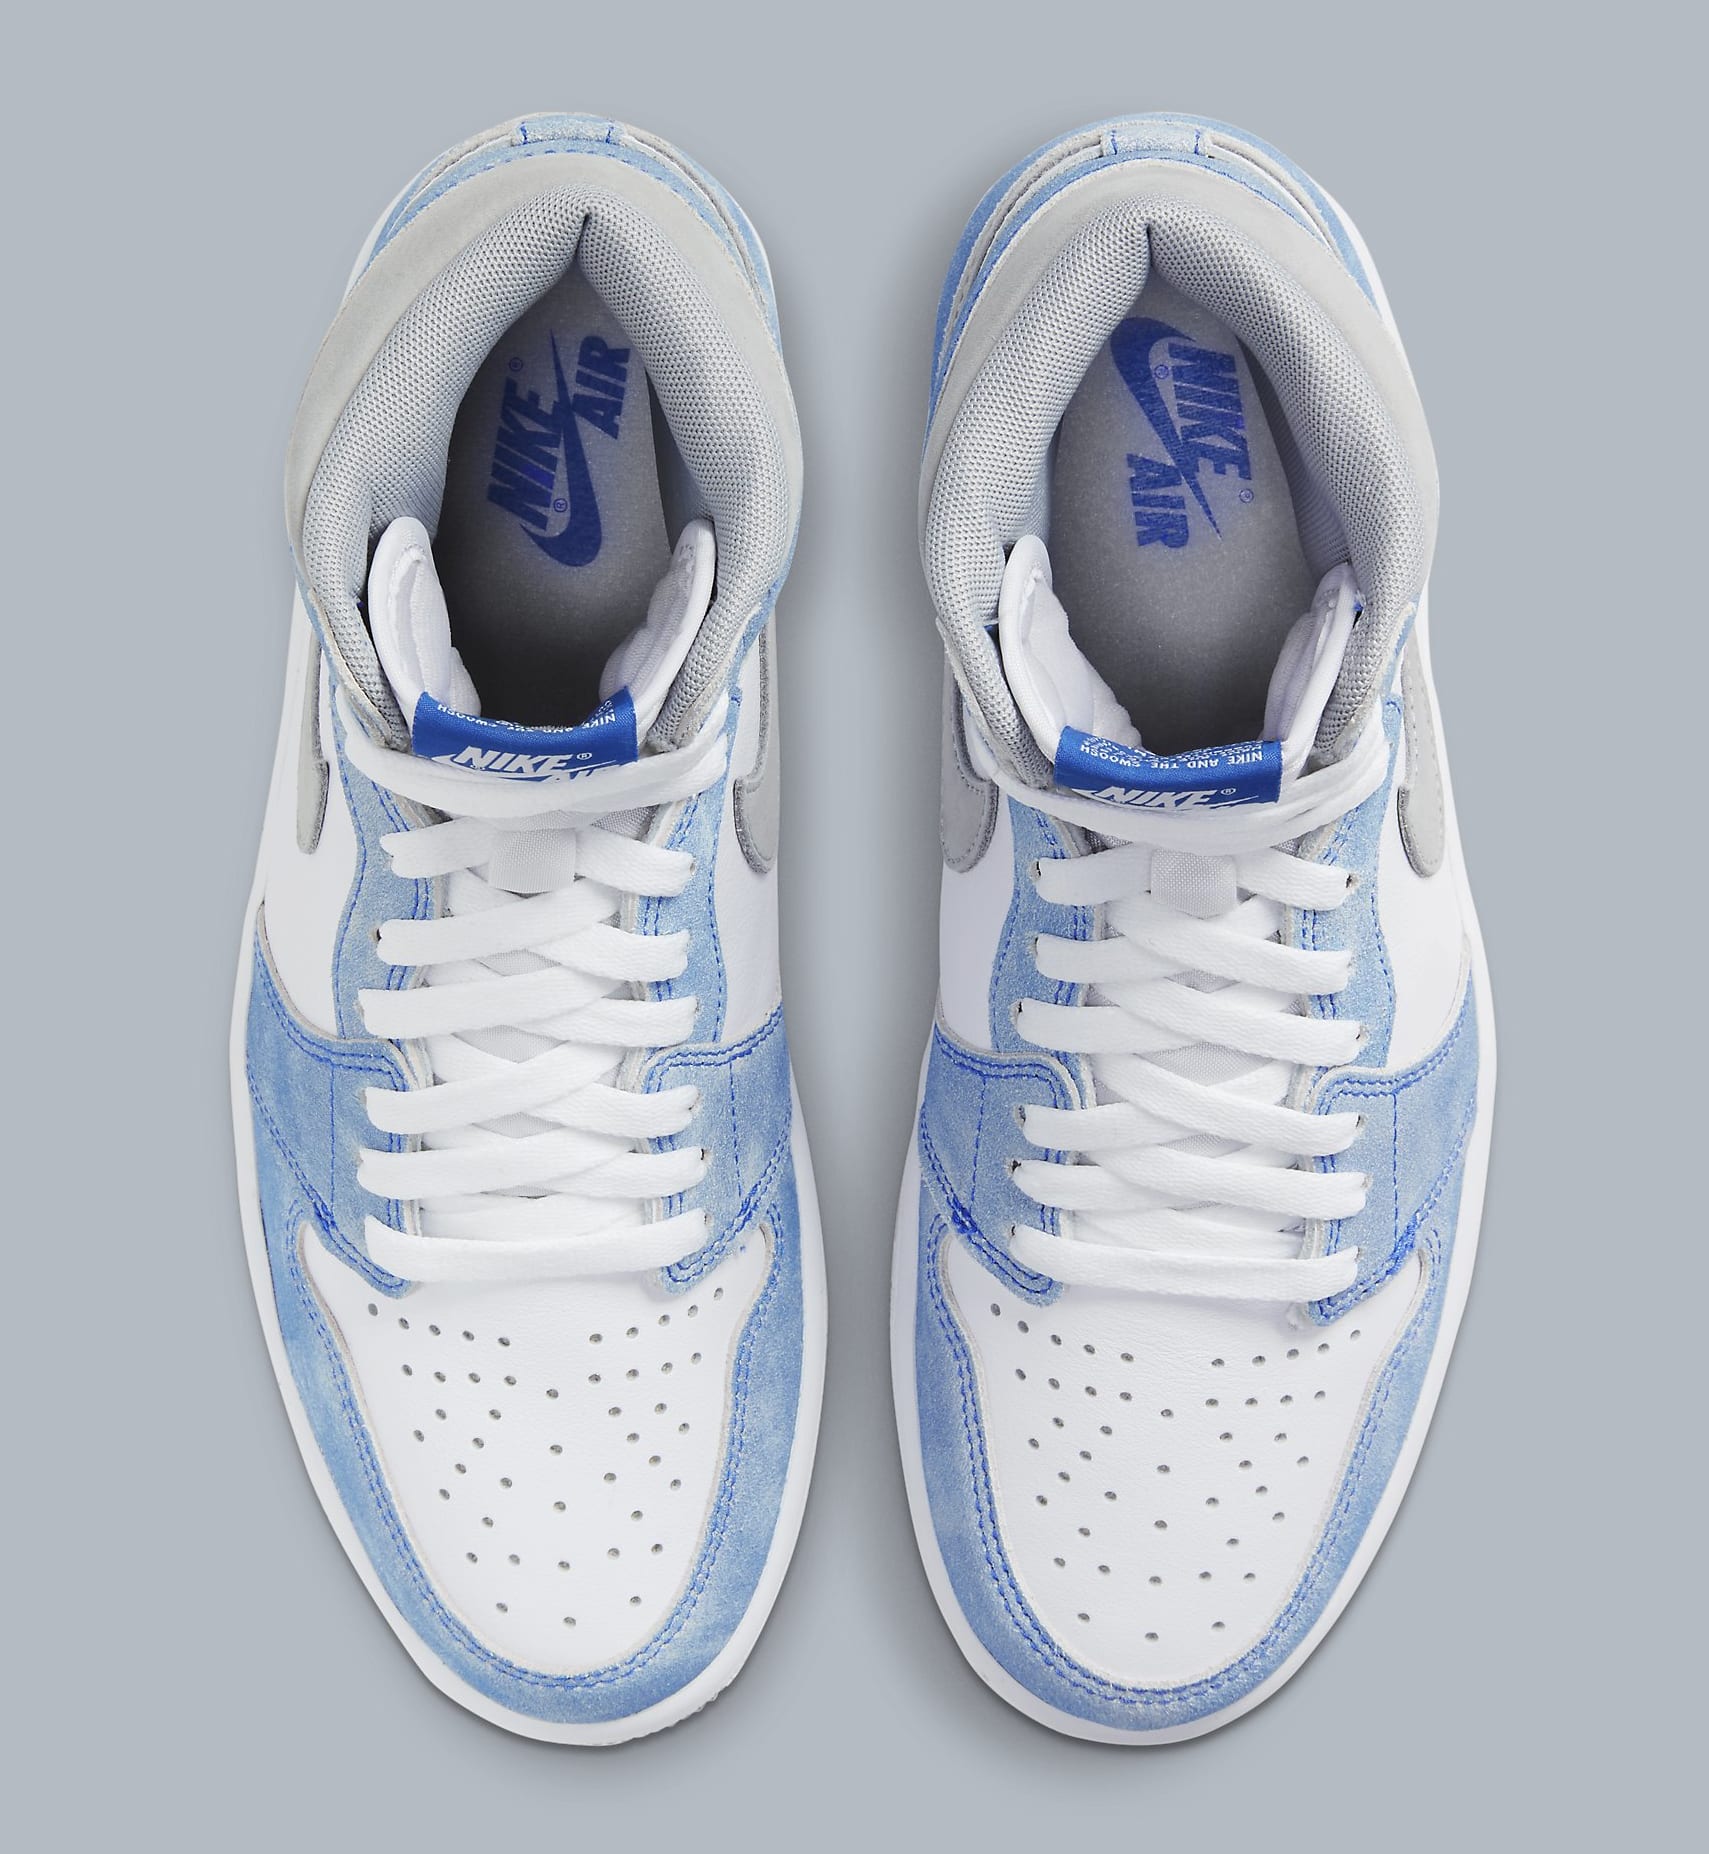 The 'Hyper Royal' Air Jordan 1 High Is Dropping This Month | Complex